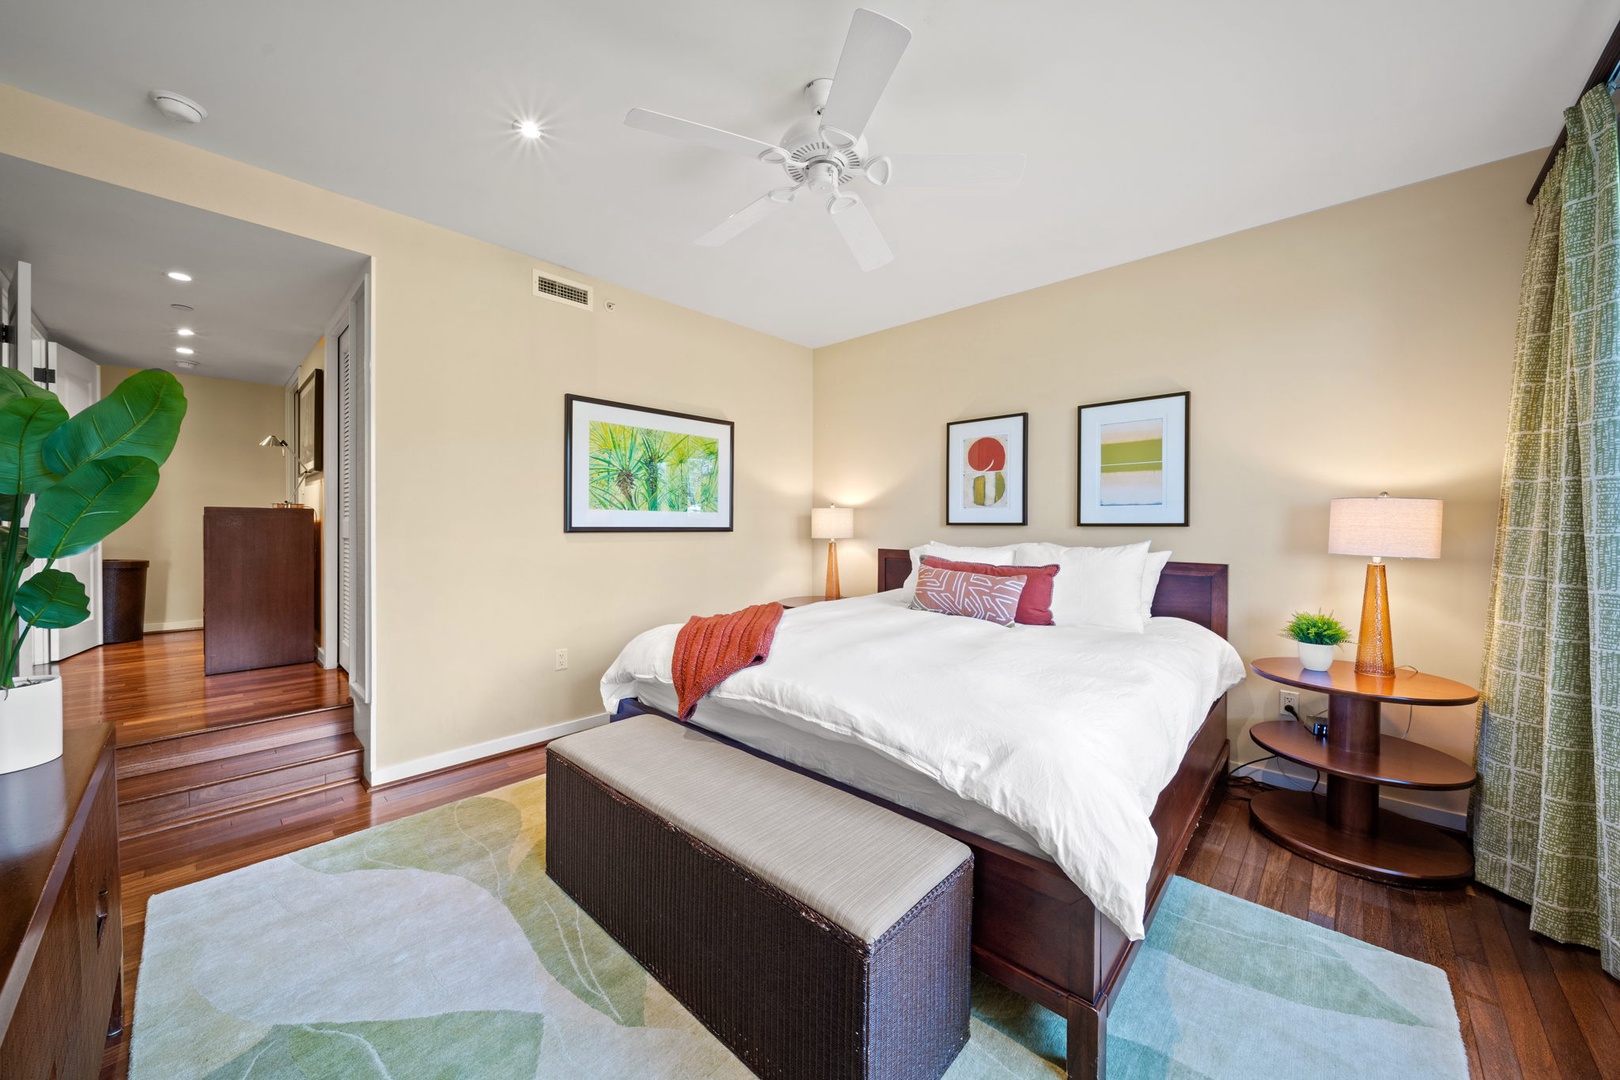 Kahuku Vacation Rentals, Turtle Bay Villas 114 - Primary is equipped with a king bed and ensuite bathroom